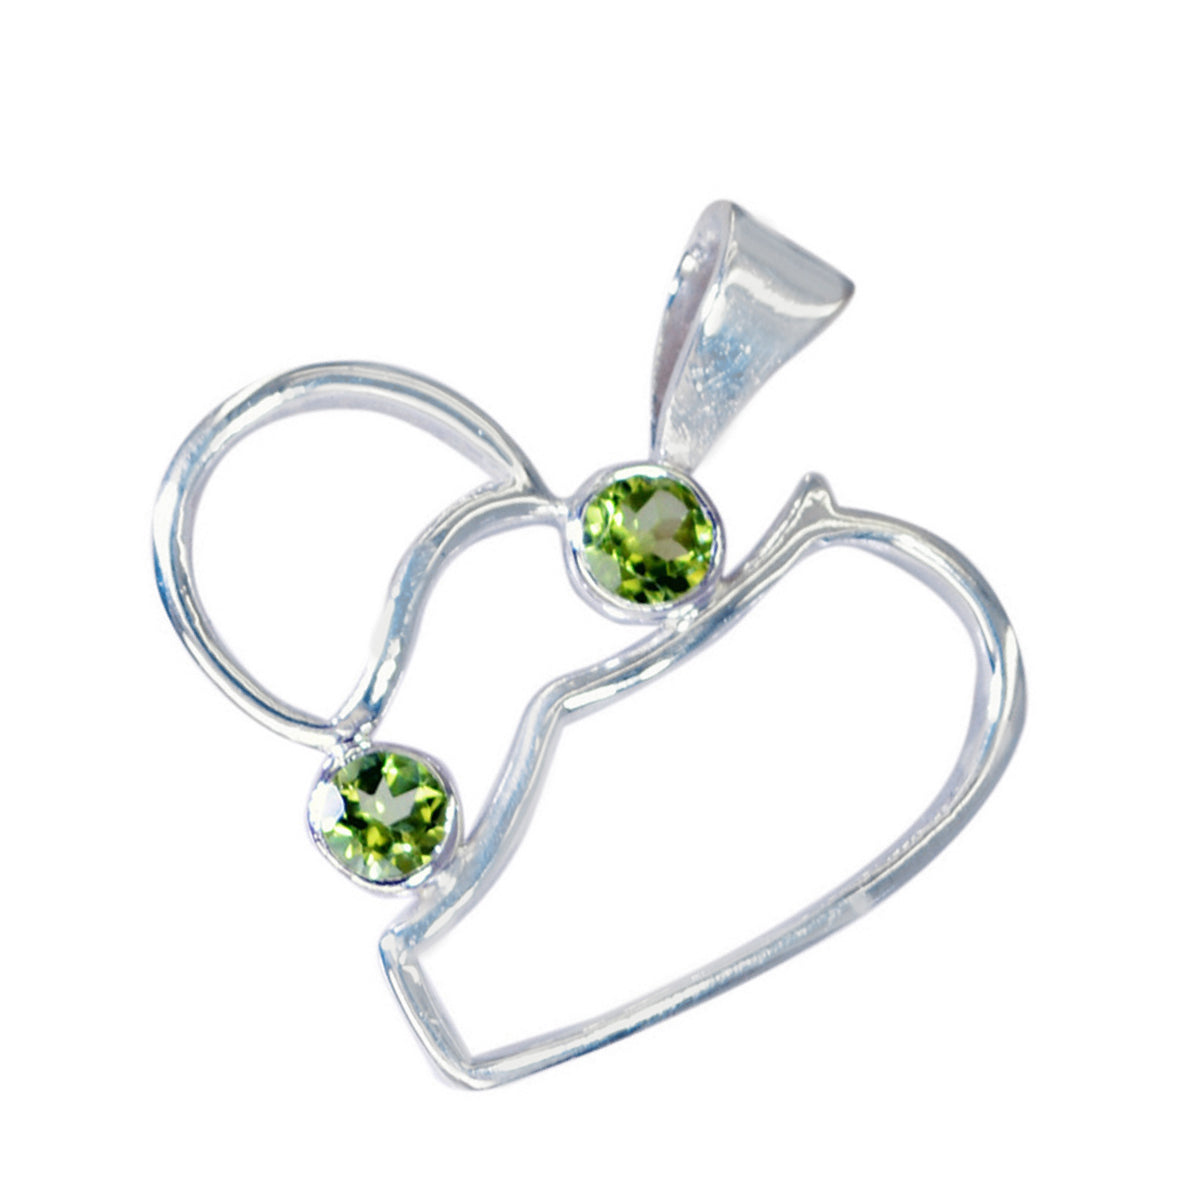 Riyo Nice Gemstone Round Faceted Green Peridot 1078 Sterling Silver Pendant Gift For Good Friday